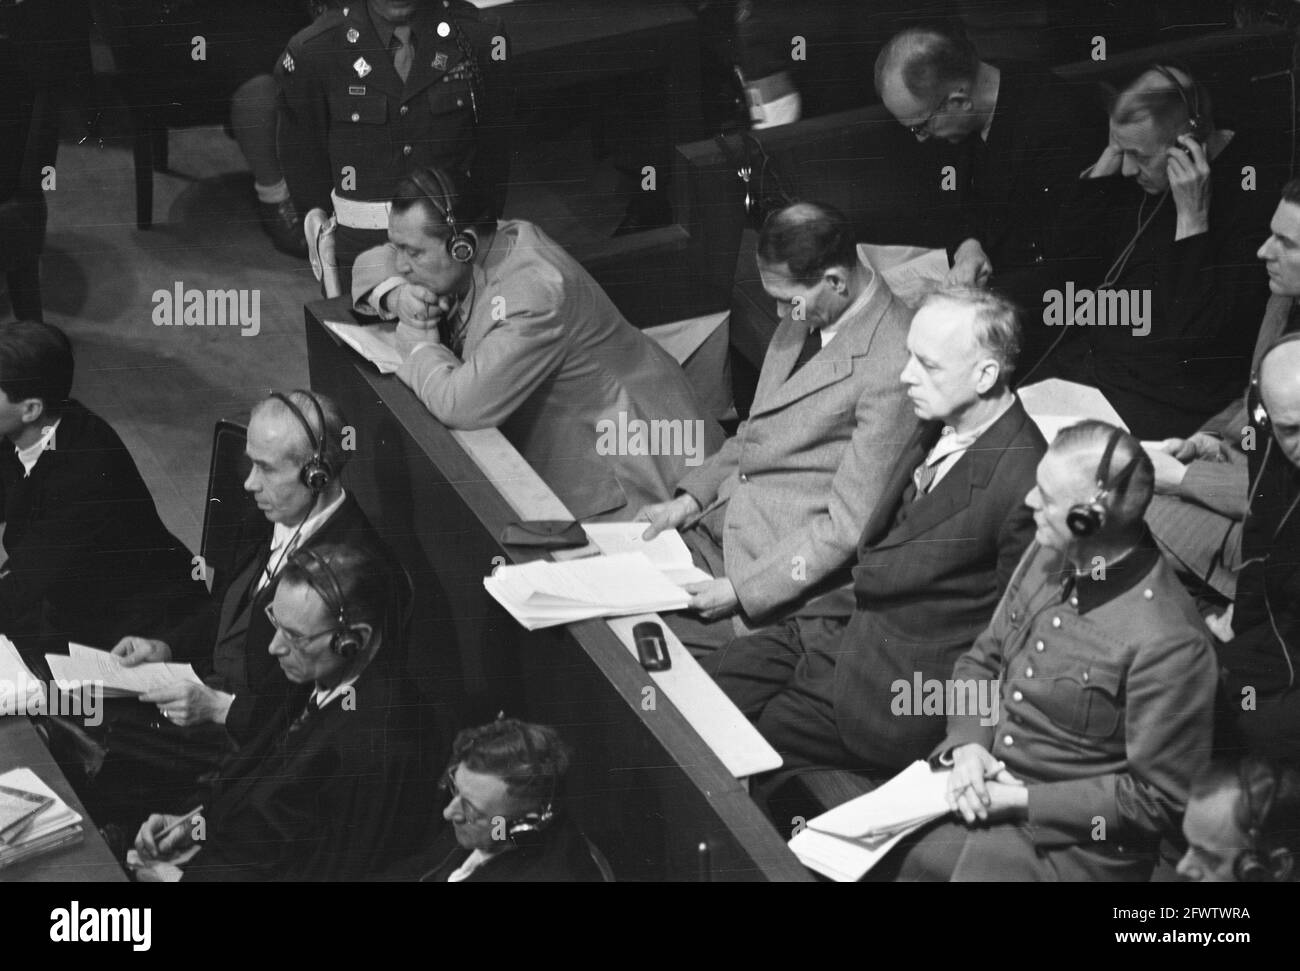 Nuremberg Trial. Defendants (ff. Herman Goering, Rudolf Hess, Von Ribbentrop, Keitel), December 4, 1945, war criminals, trials, administration of justice, World War II, The Netherlands, 20th century press agency photo, news to remember, documentary, historic photography 1945-1990, visual stories, human history of the Twentieth Century, capturing moments in time Stock Photo